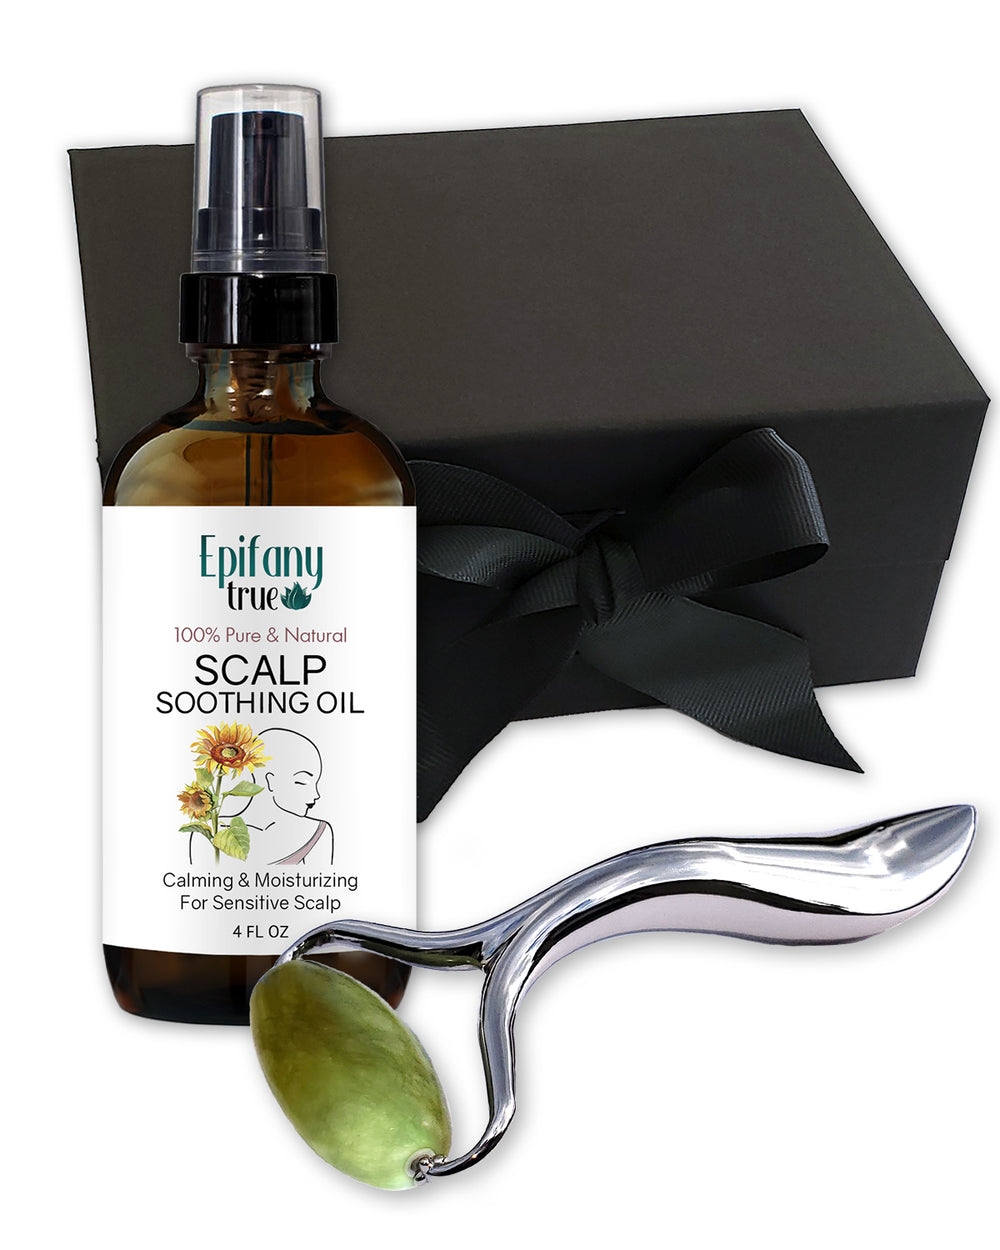 Gentle Care Scalp Soothing Oil 4oz and Natual Green Jade Roller Gift Set for chemo hair loss